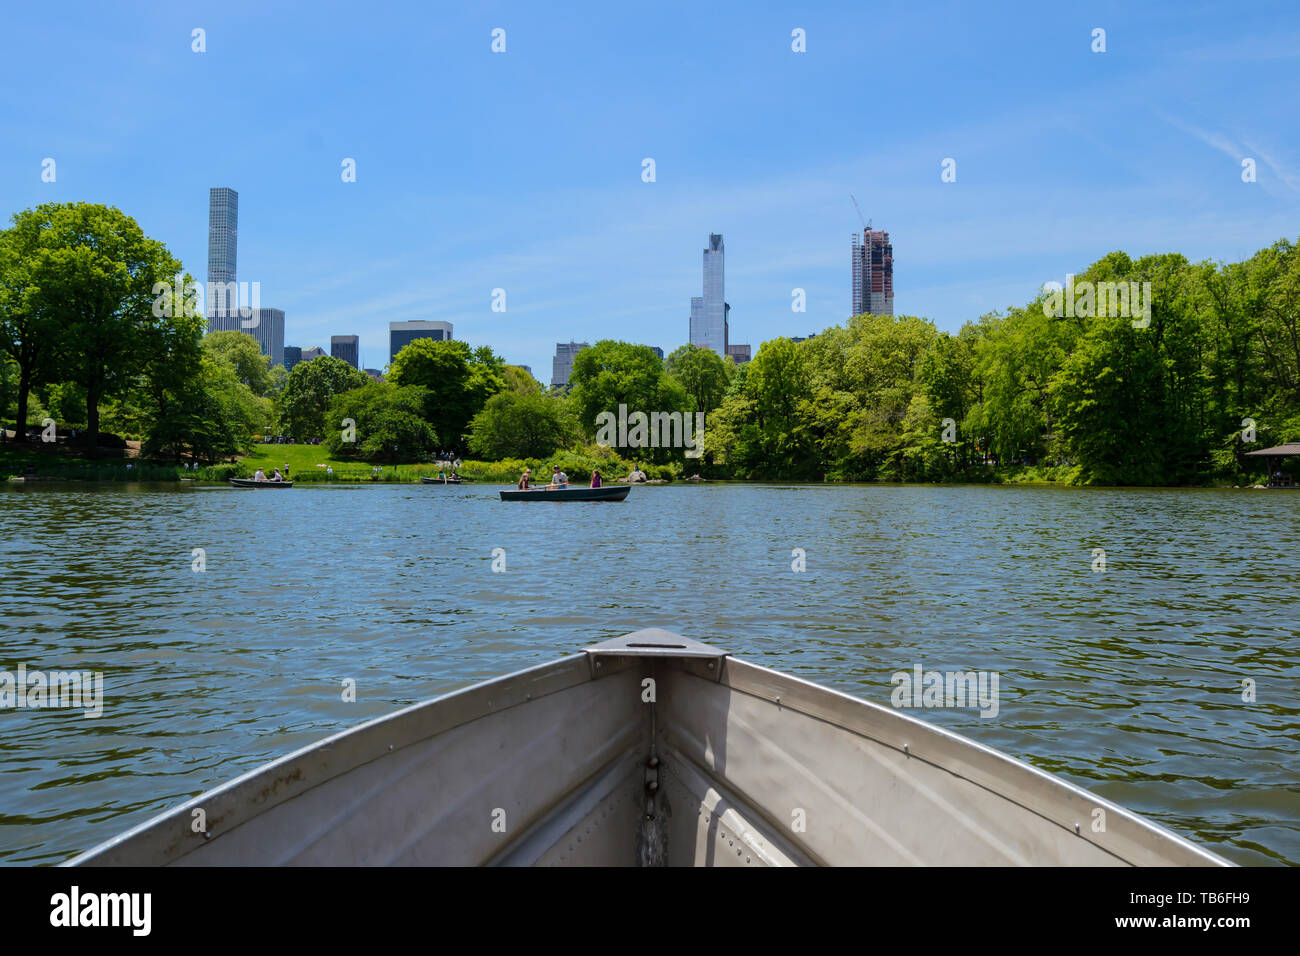 Paddling in the lake of the Central Park, New York City, USA Stock Photo